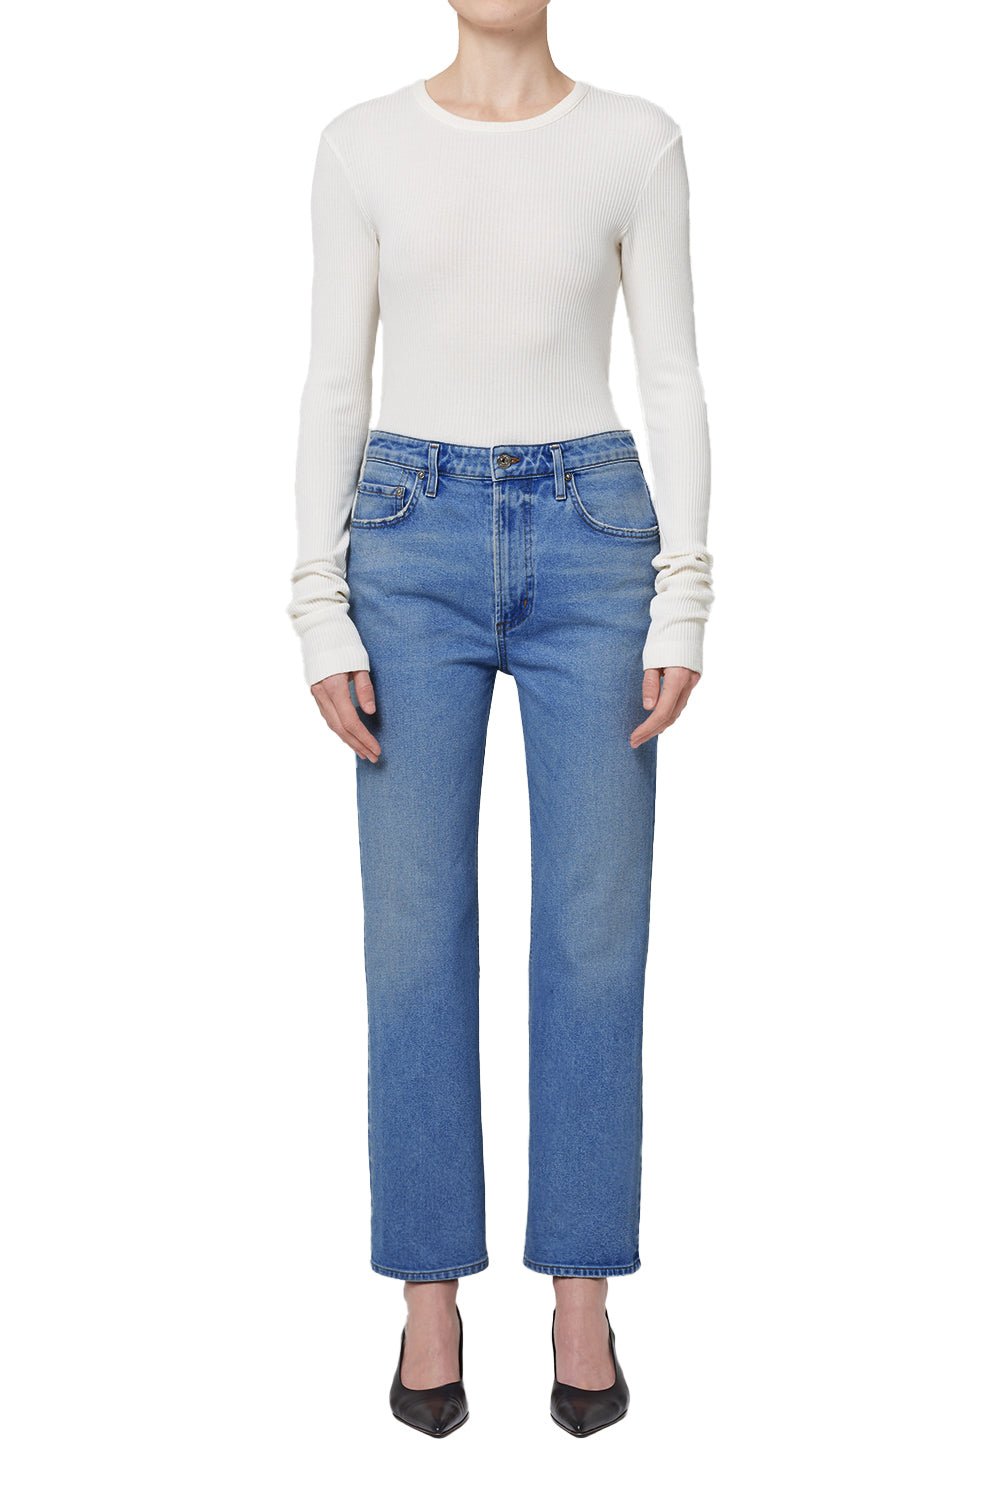 Abalone Zurie Ankle Jeans - Amor Lafayette